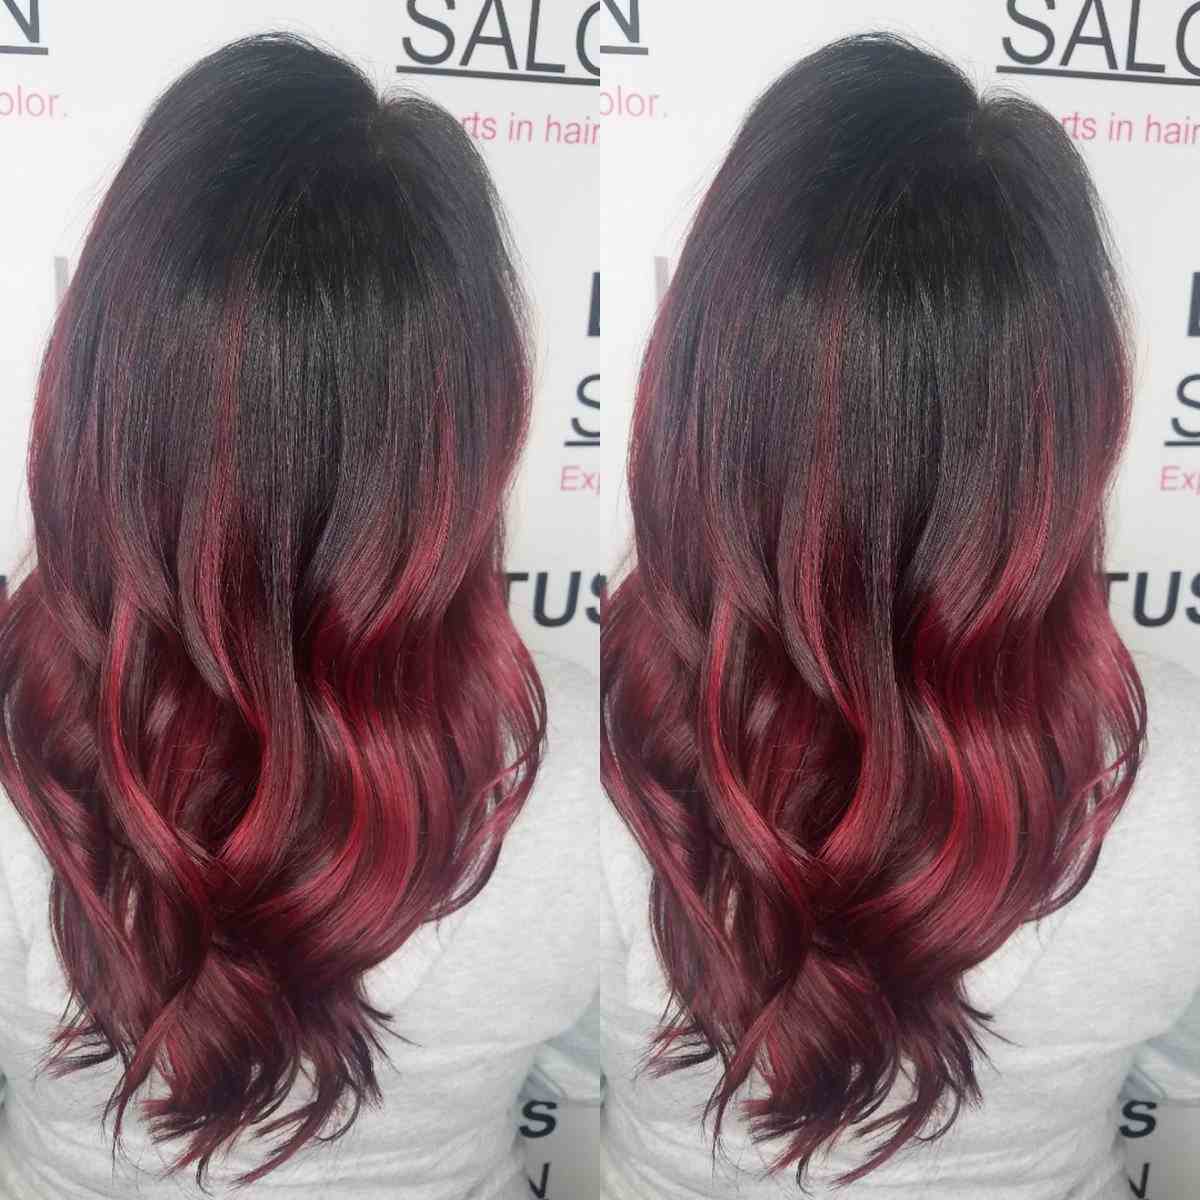 Burgundy Red Hair Color Balayage Red on Dark Hair Care Tips